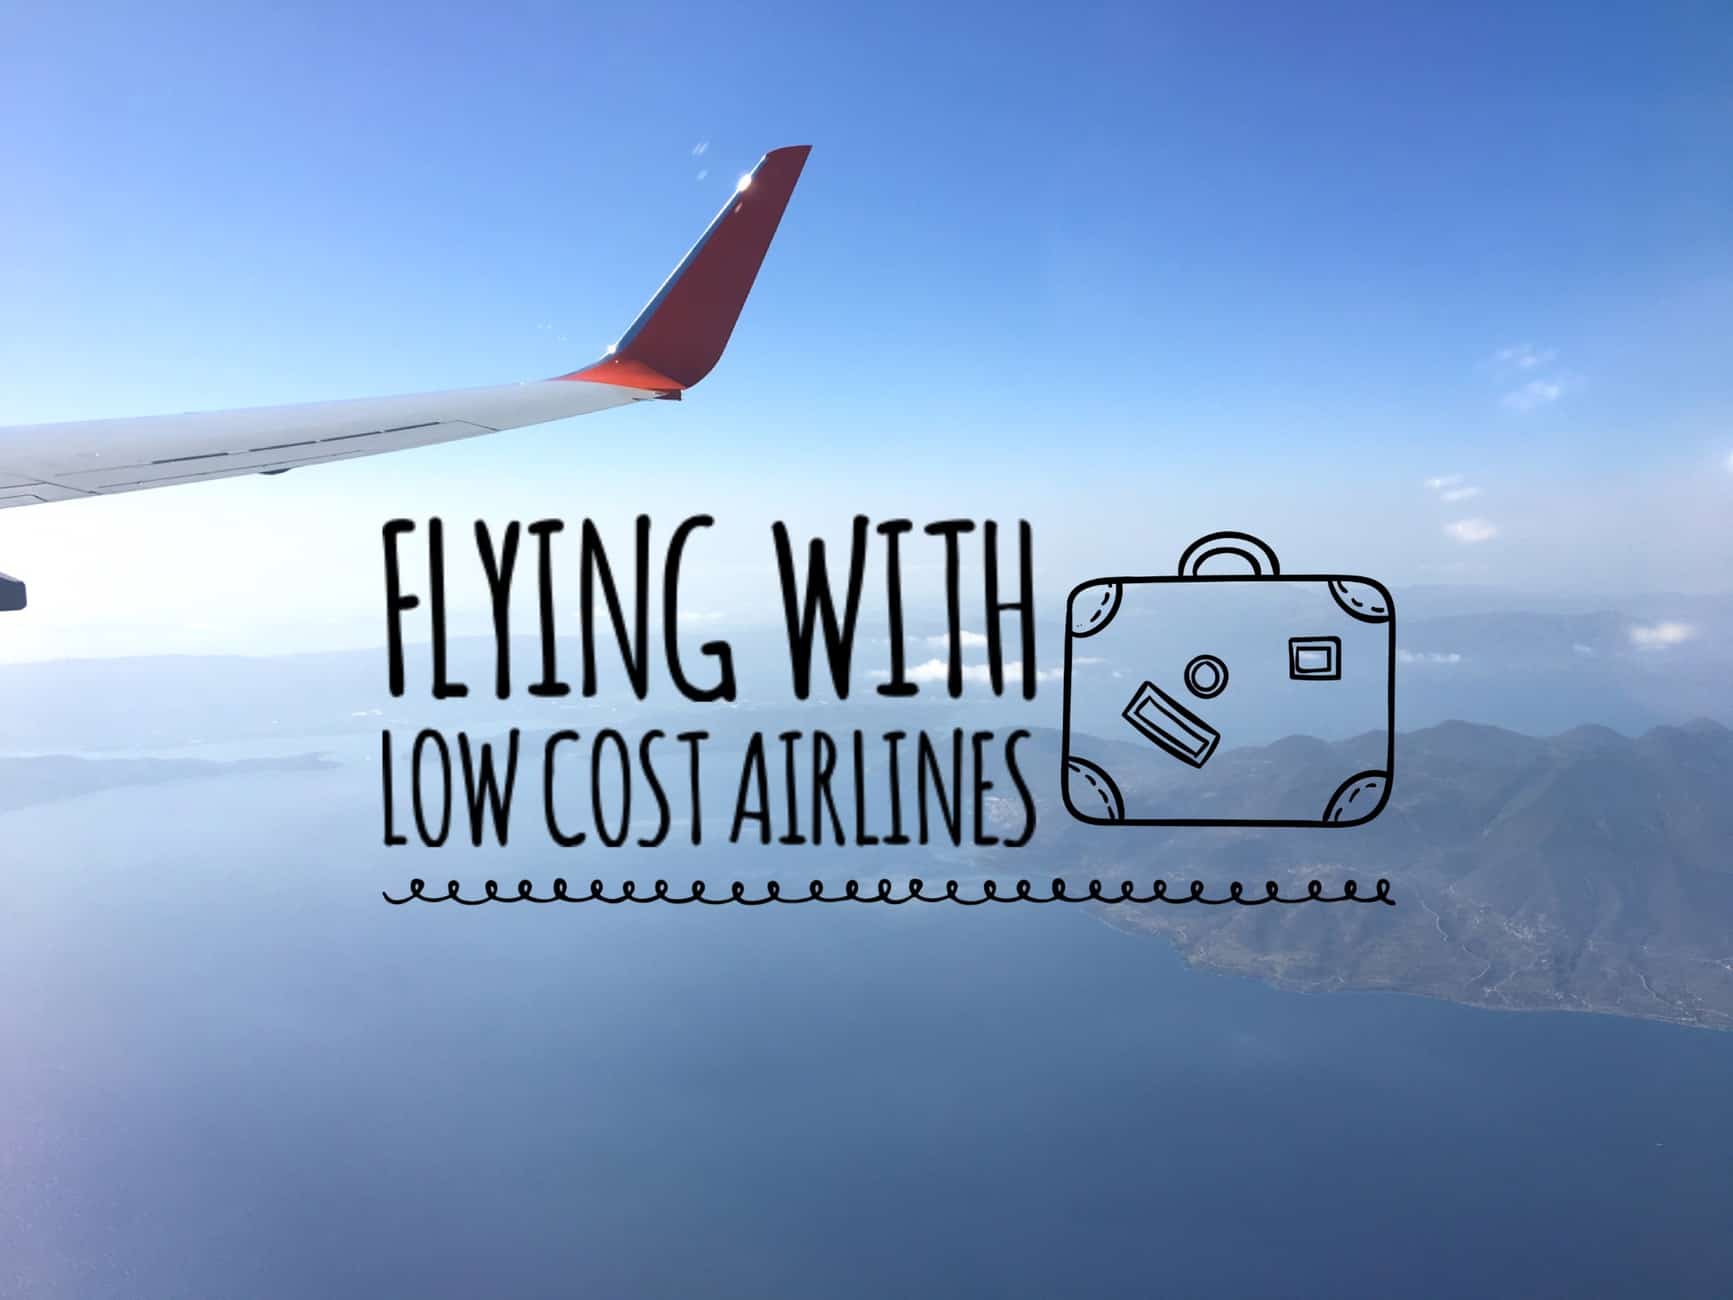 Low cost airlines reviews: flying with Ryanair, Easyjet, AirBaltic and Norwegian